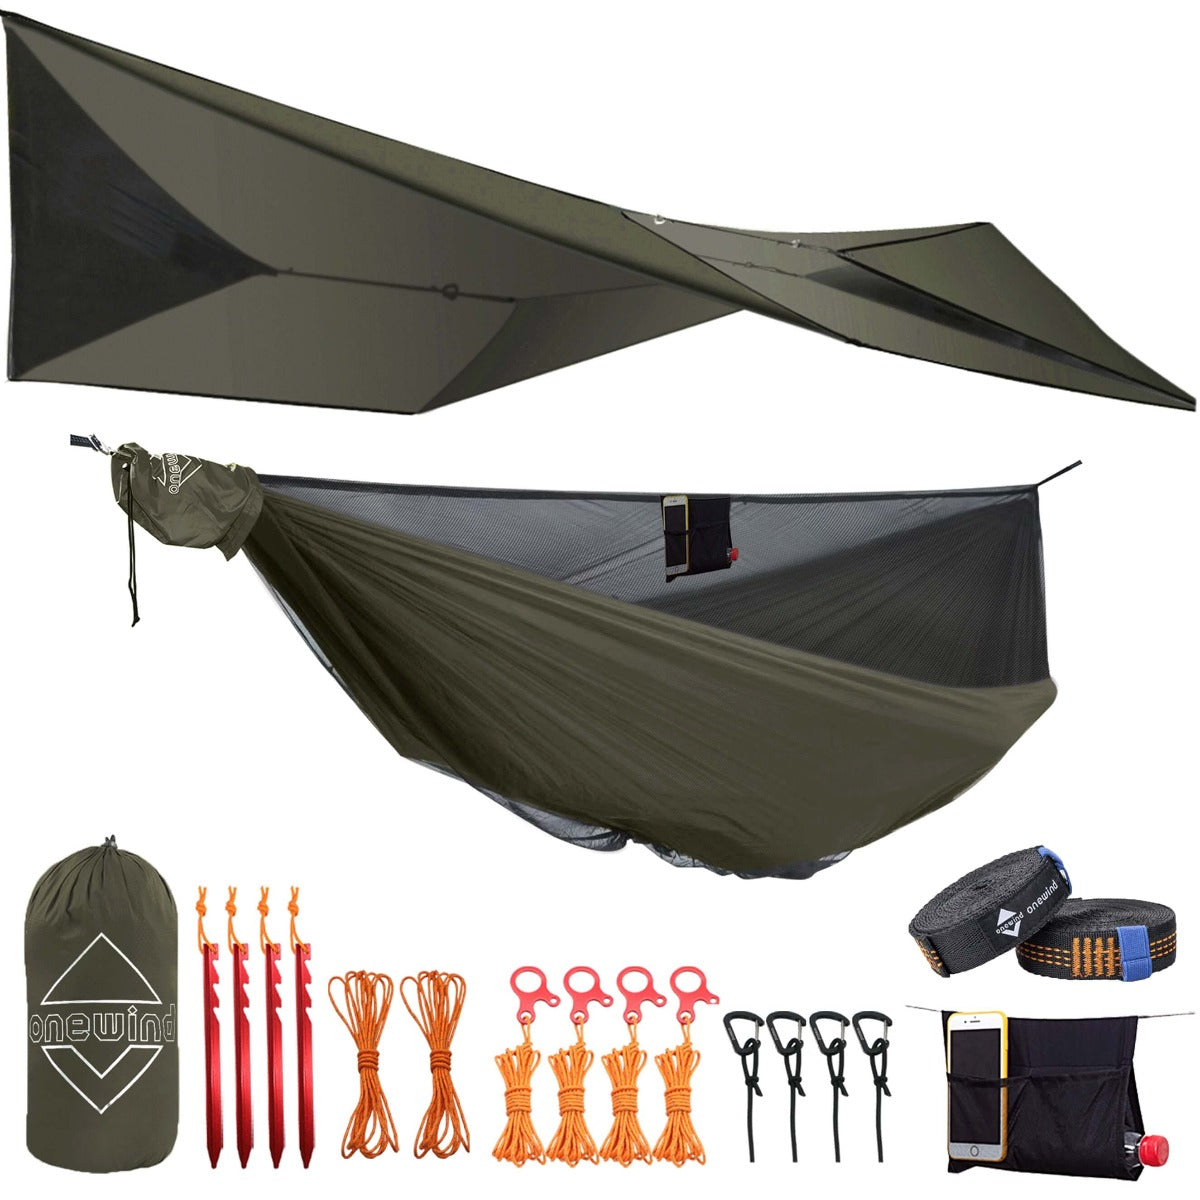 Budget Camping Hammock with Tarp | Onewind Outdoors